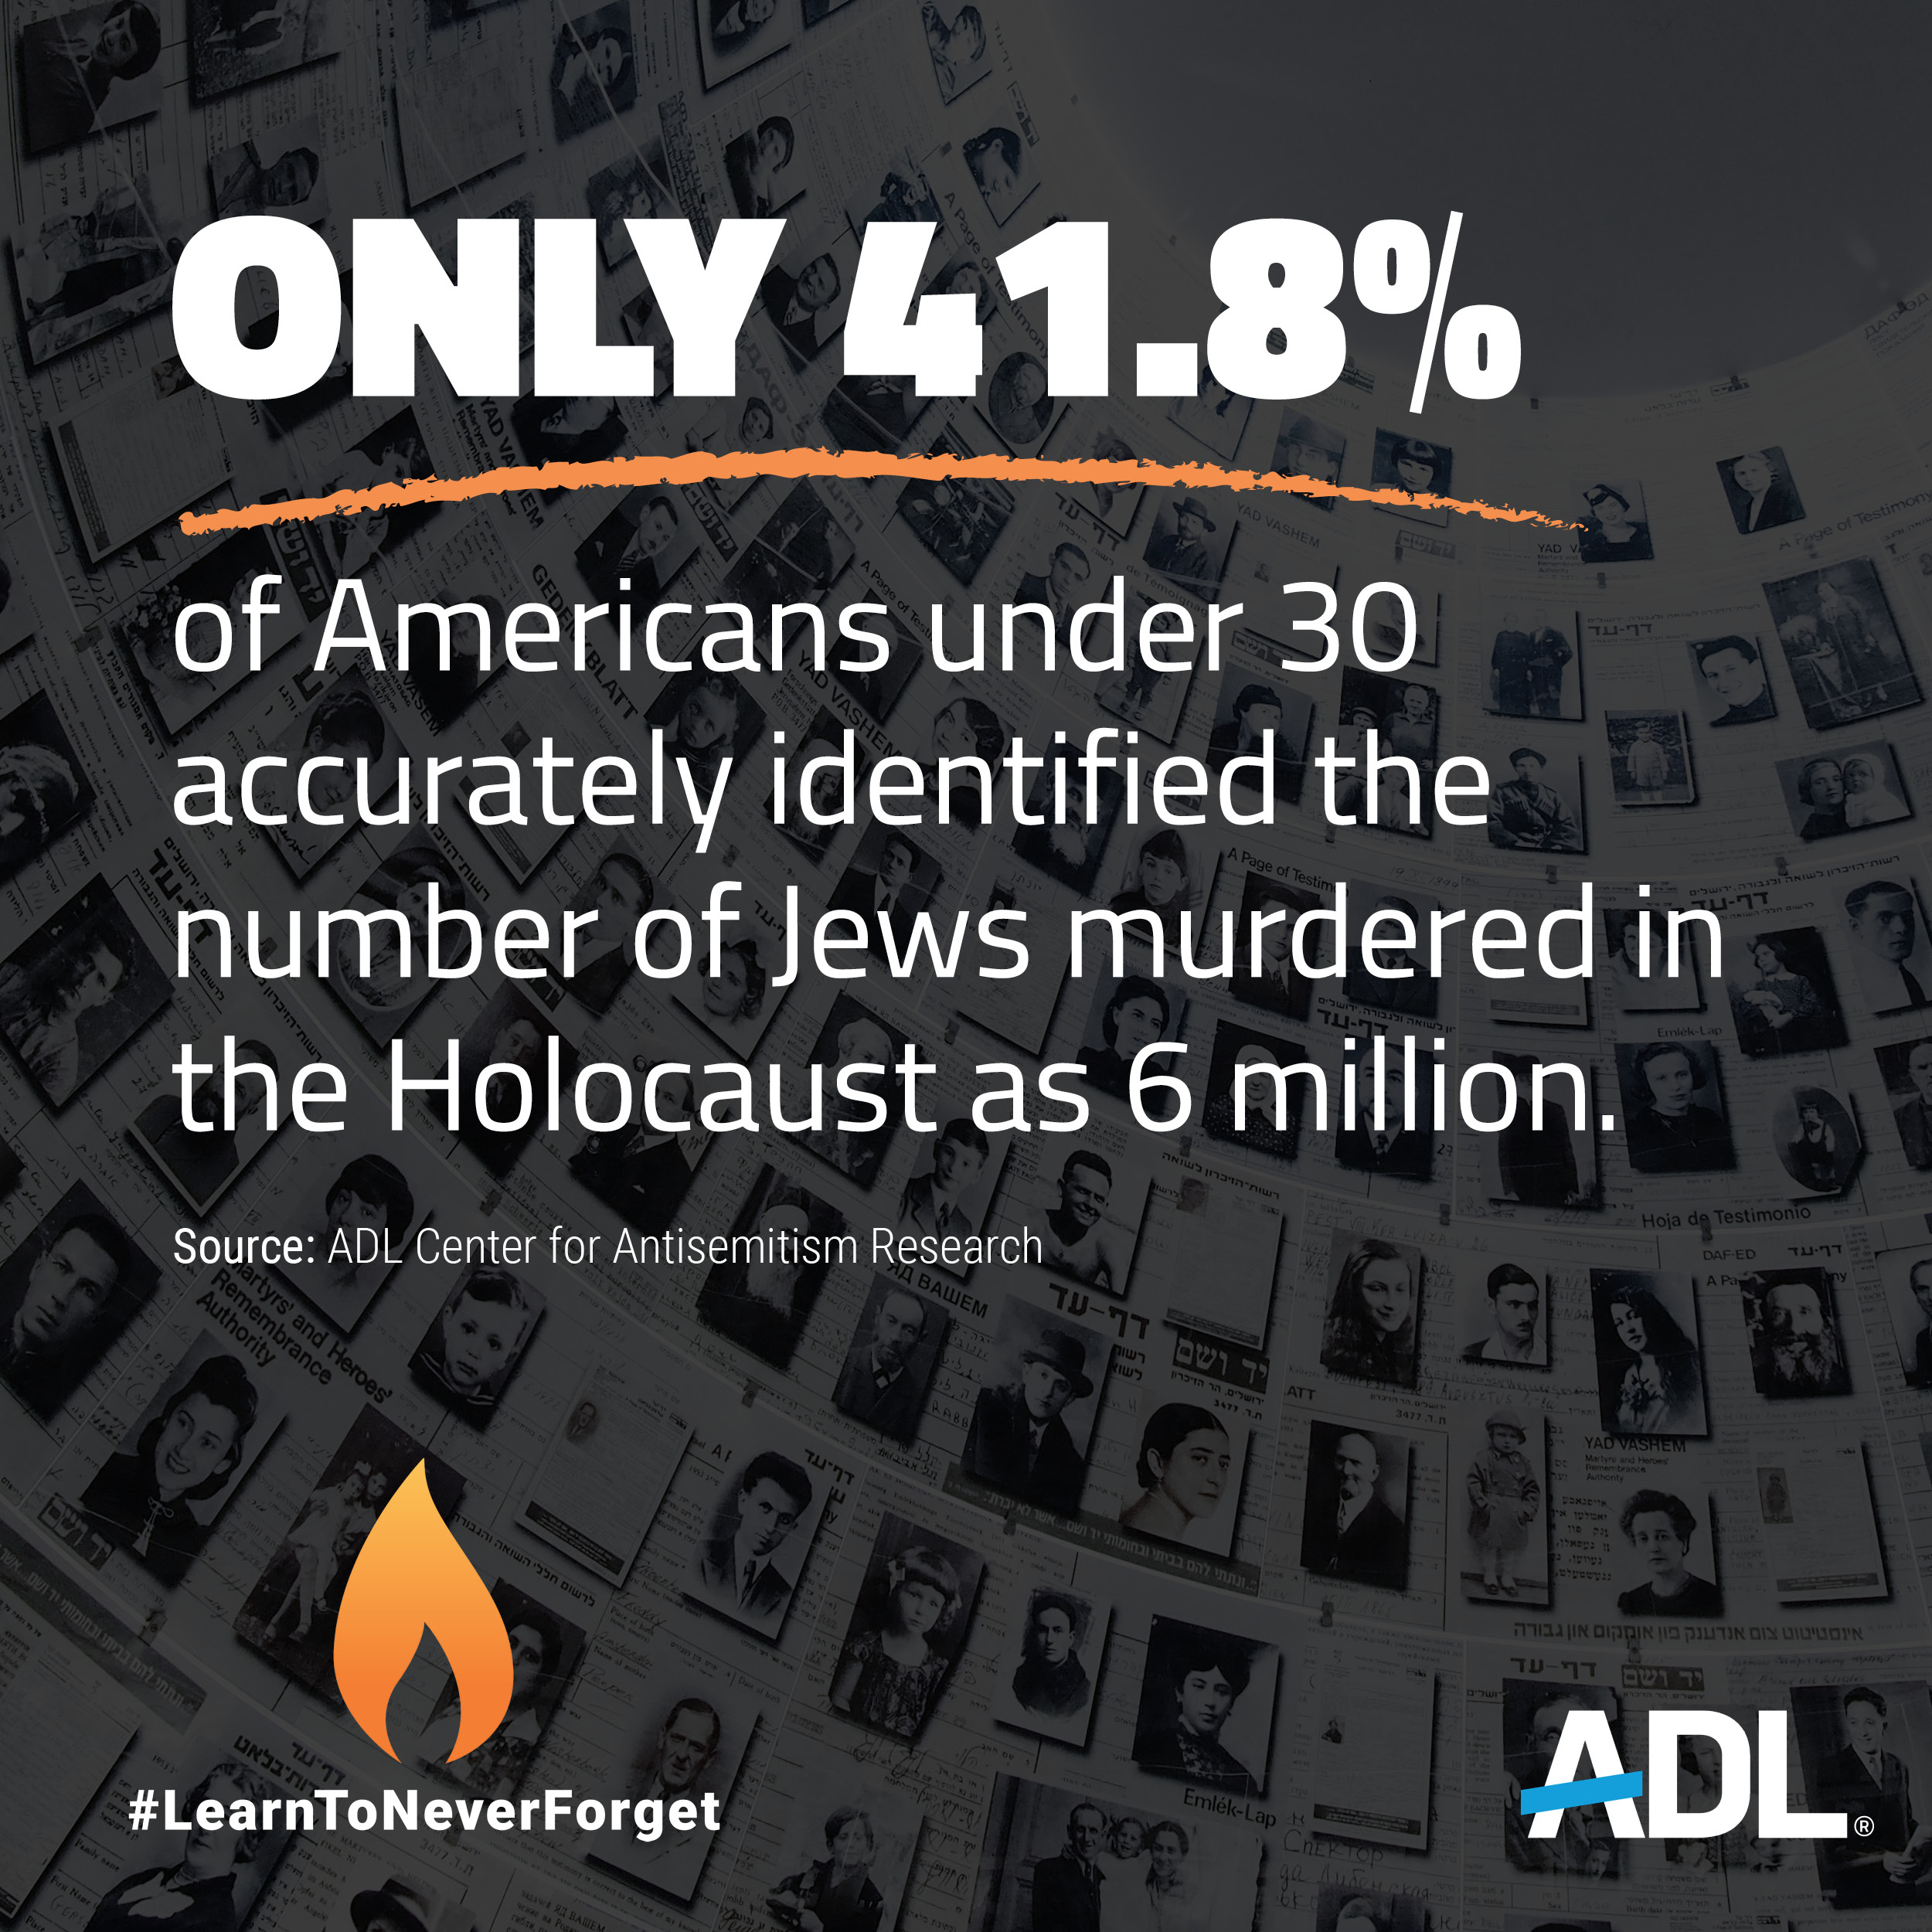 ONLY 41.8%
of Americans under 30 accurately identified the number of Jews murdered in the Holocaust as 6 million.
Source: ADL Center for Antisemitism Research
#LearnToNeverForget
ADL Logo
